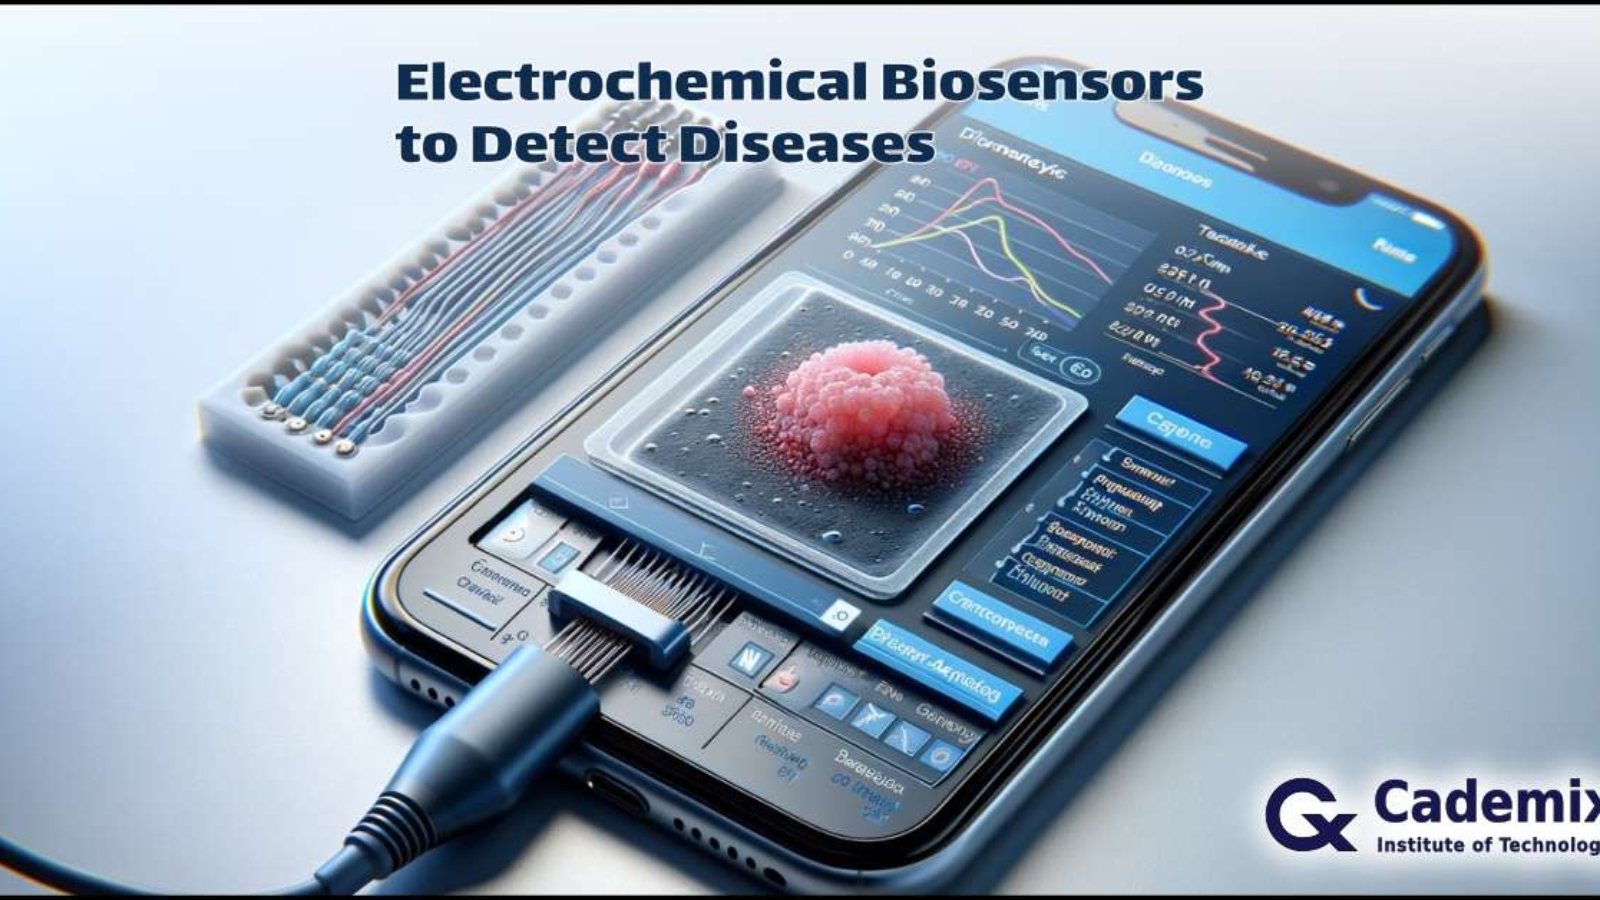 Electrochemical Biosensors: Revolutionizing Point of Care Diagnostics- An Overview